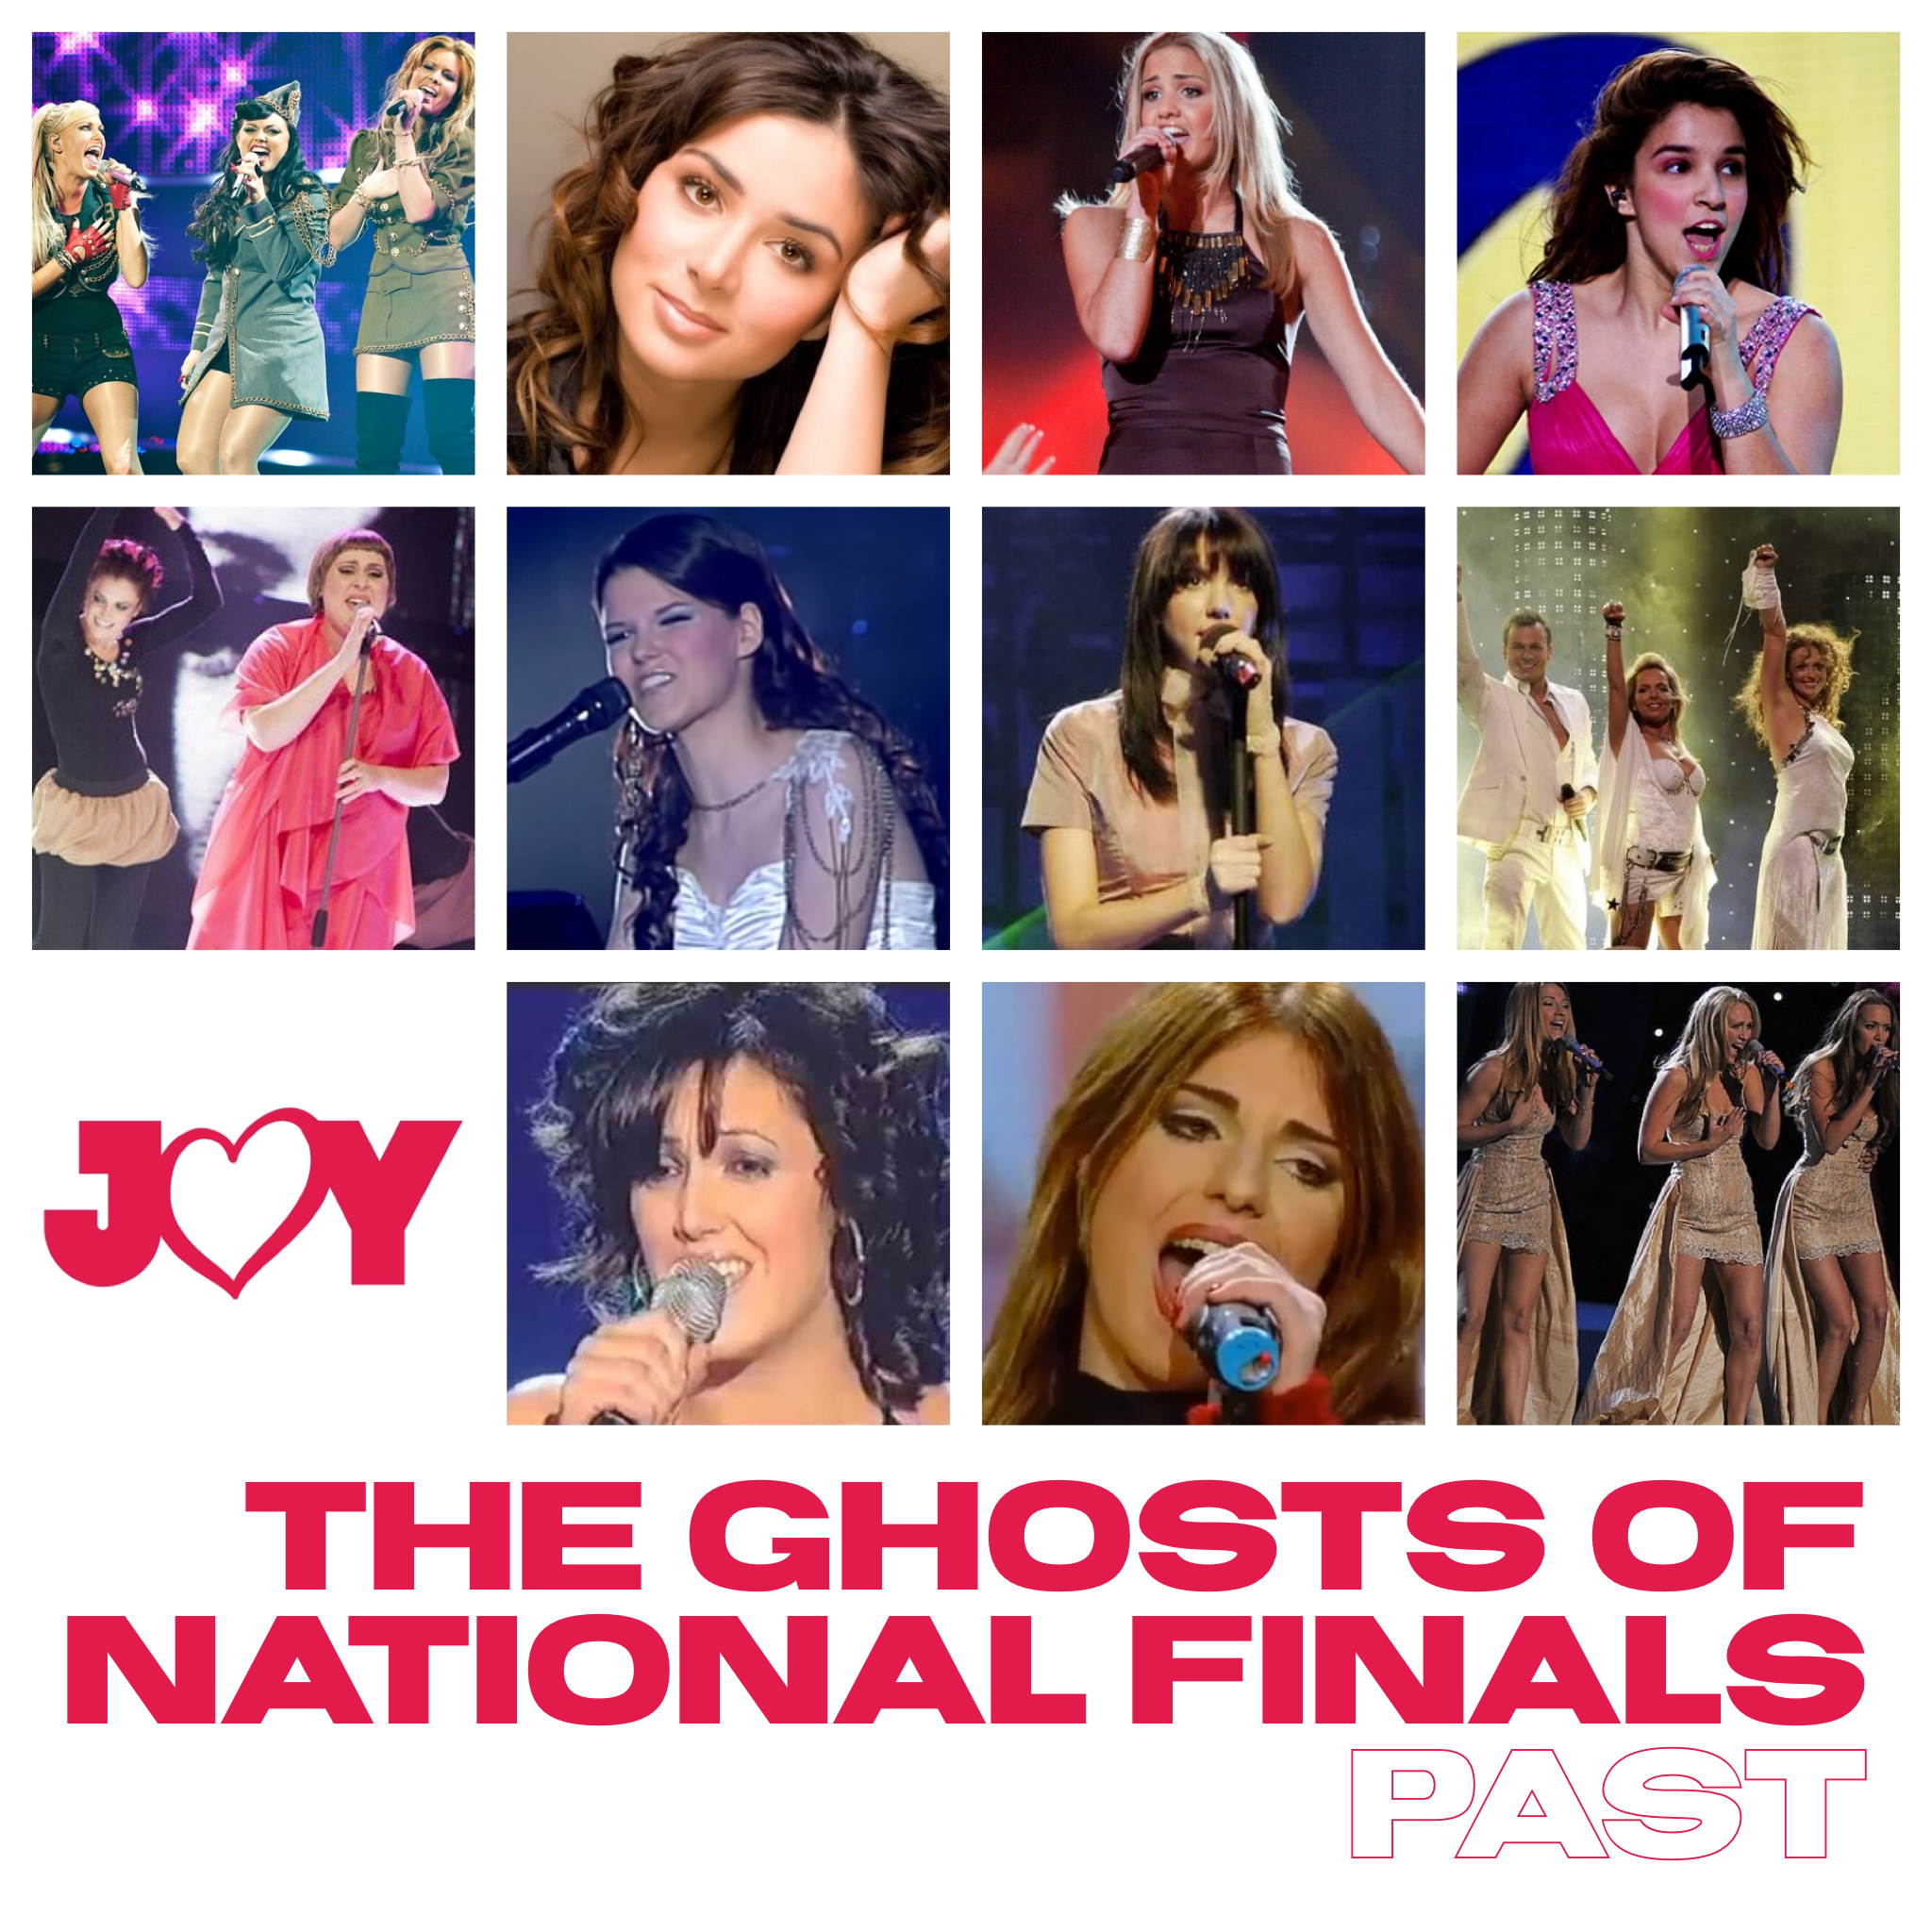 The Ghosts of National Finals Past